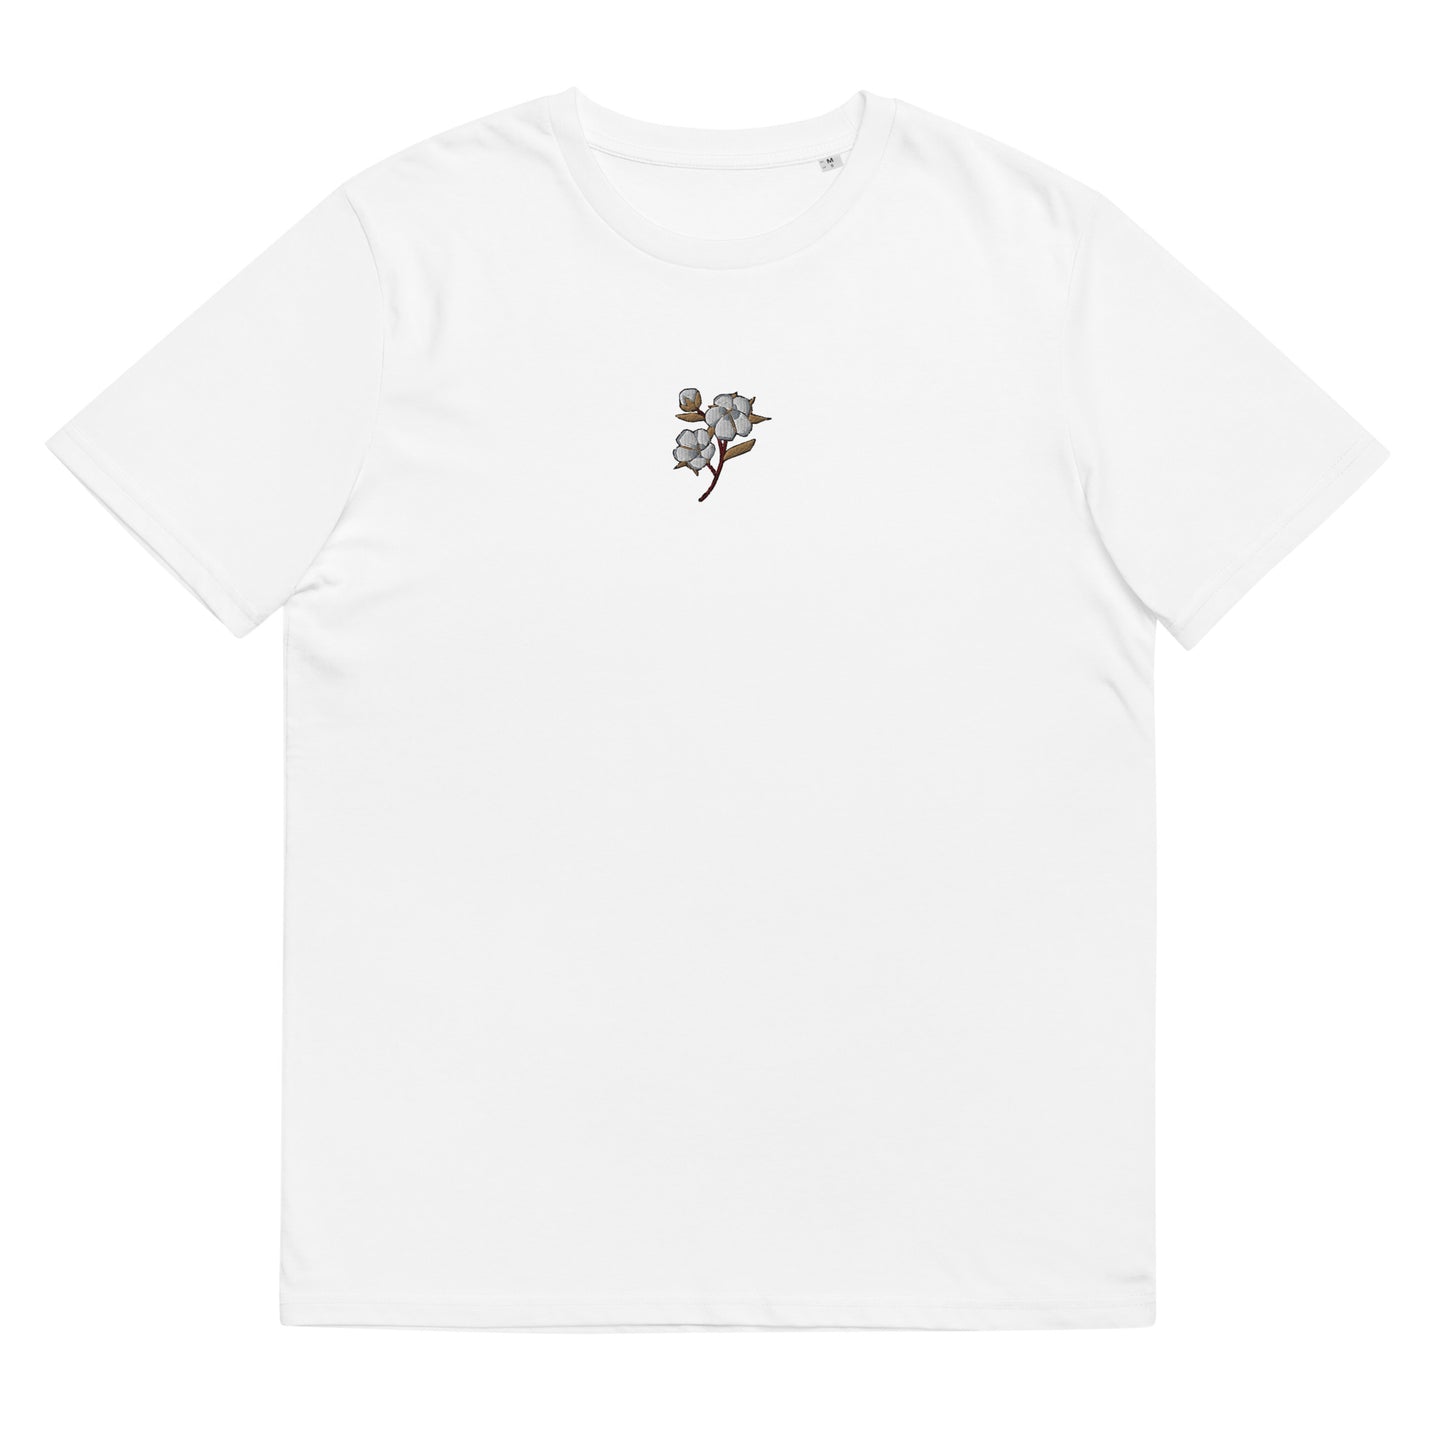 Bavovna unisex organic cotton t-shirt with embroidery in white